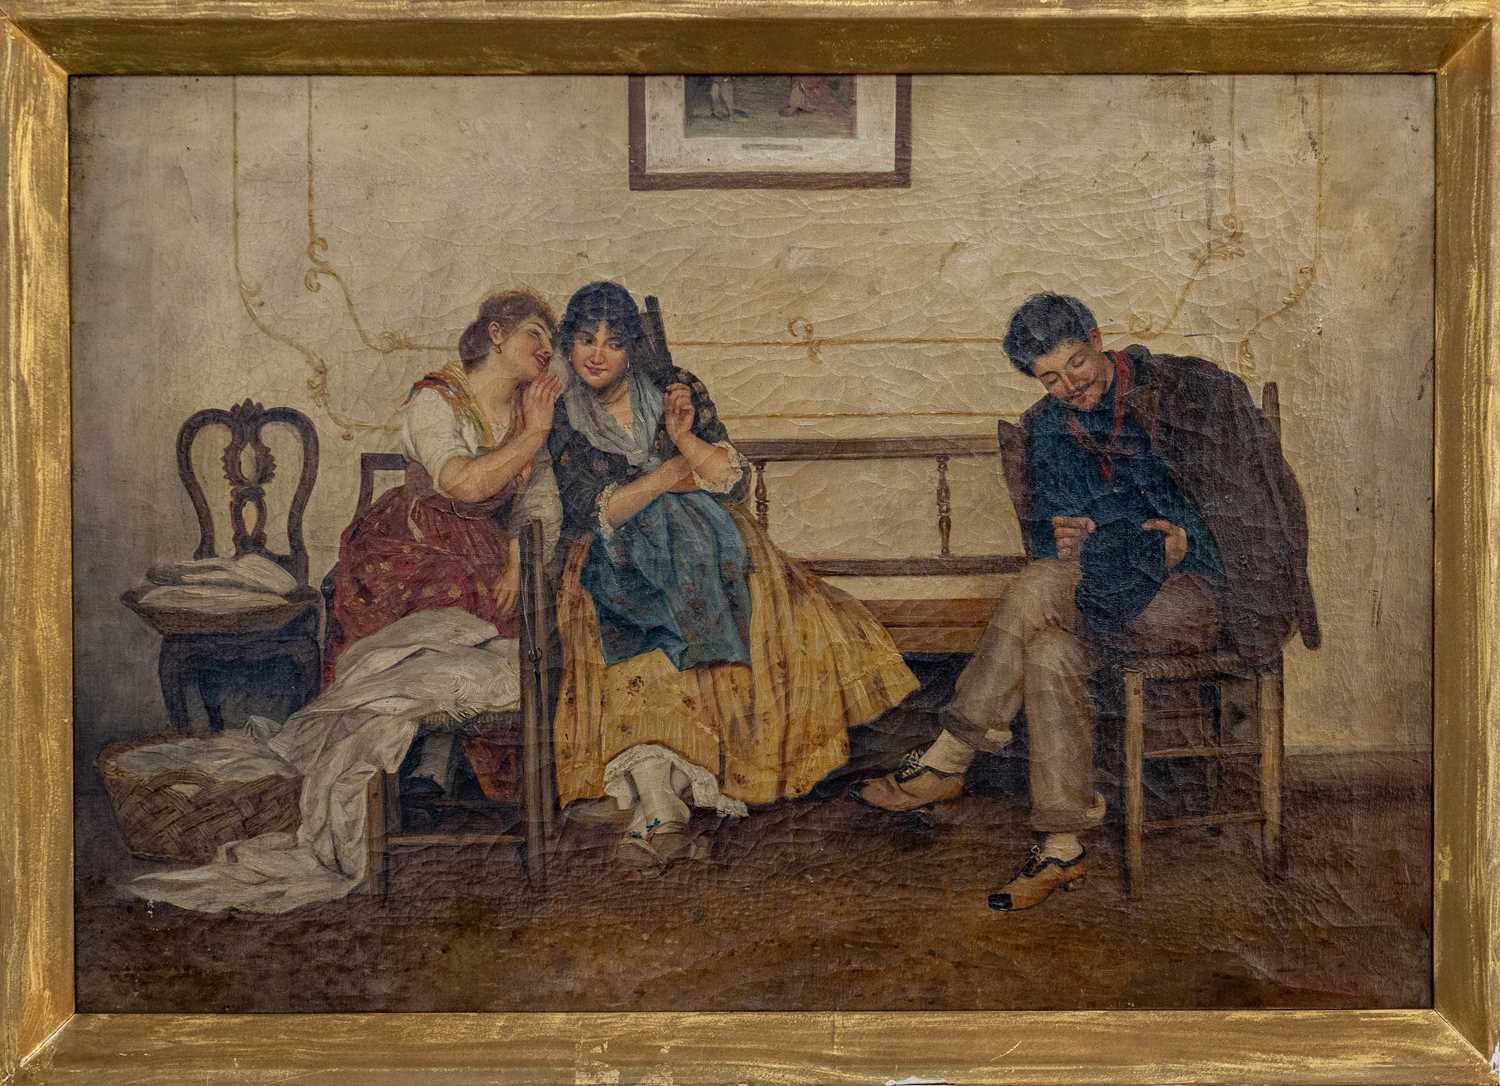 J WERNER (19TH CENTURY) oil on canvas - The Whisper, signed, 46 x 67cm Provenance: private